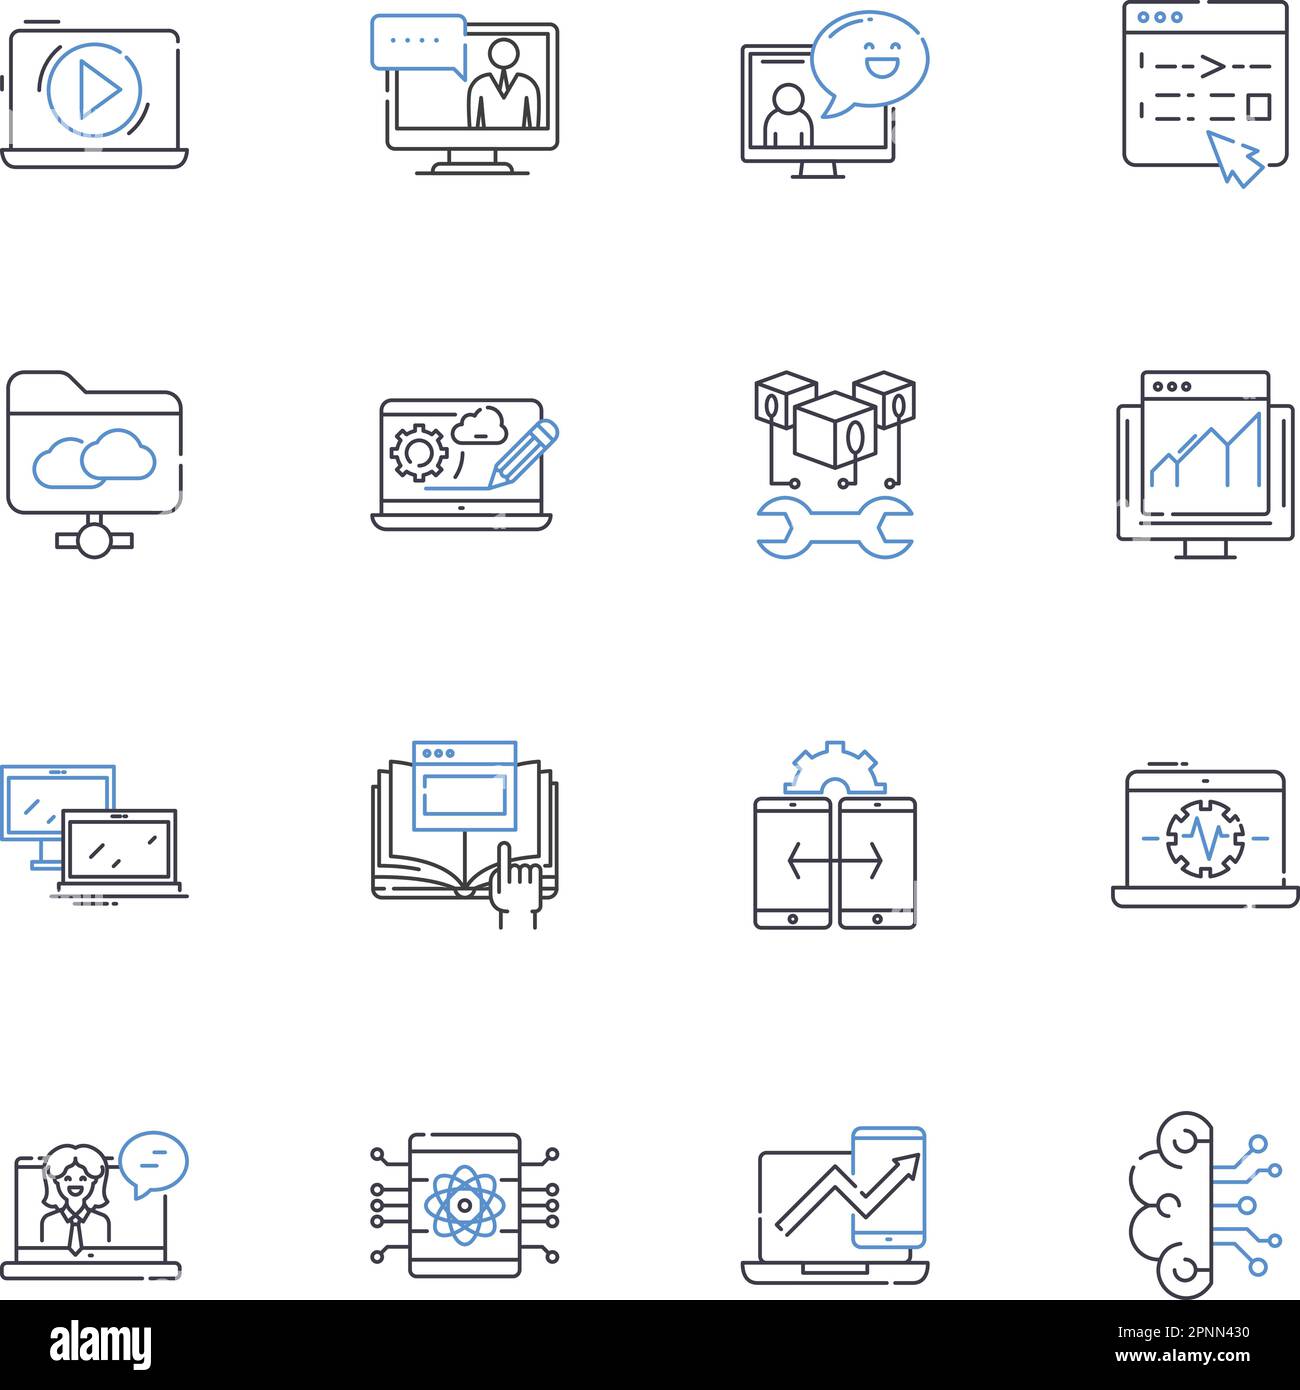 Cyber Hub line icons collection. Technology, Innovation, Nerking, Digital, Security, Connectivity, Cybercrime vector and linear illustration. Data Stock Vector